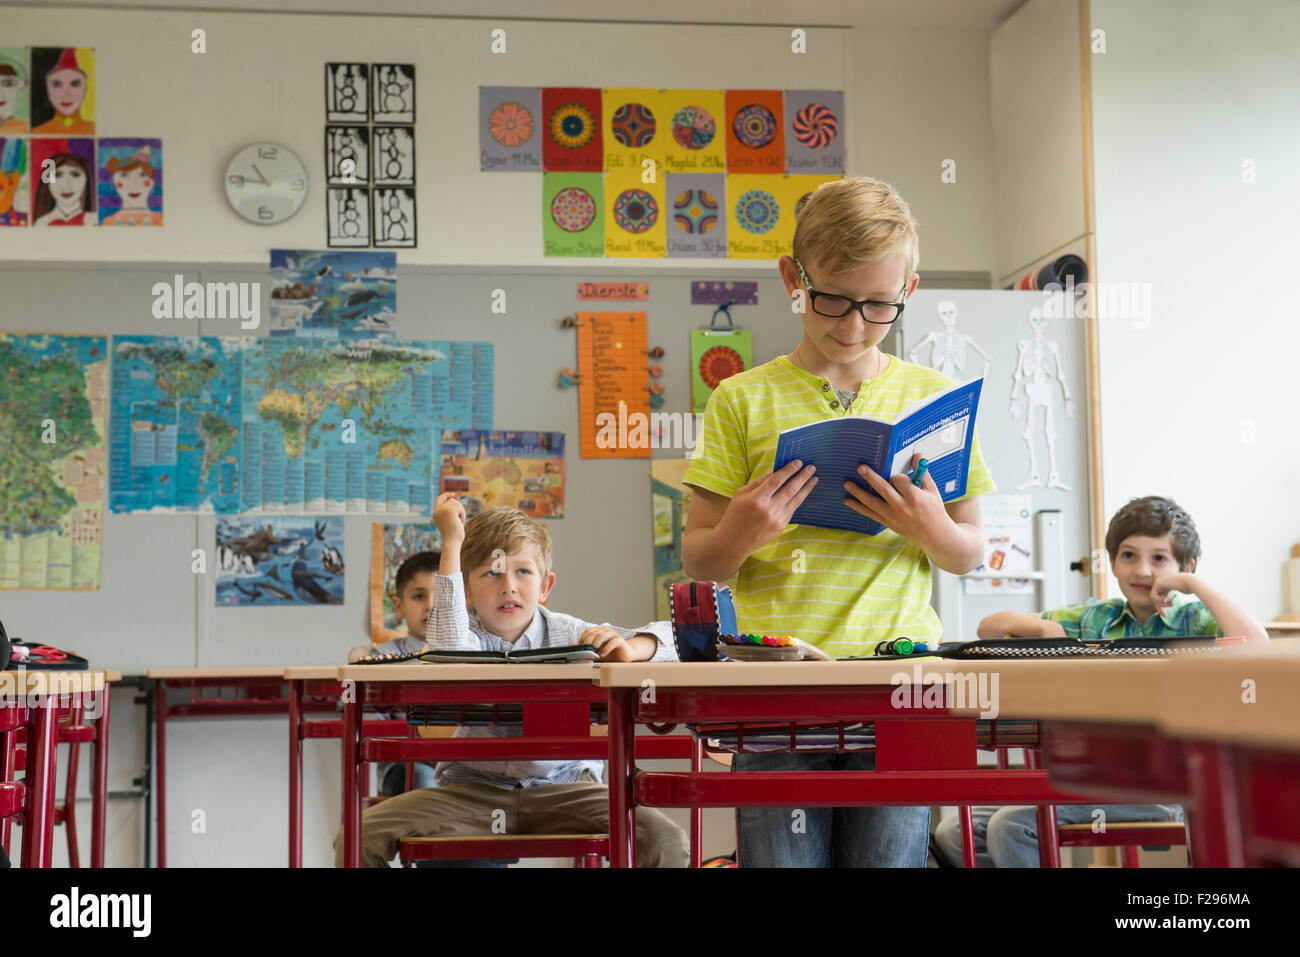 schoolboy reading a book in classroom, Munich, Bavaria, Germany Stock Photo